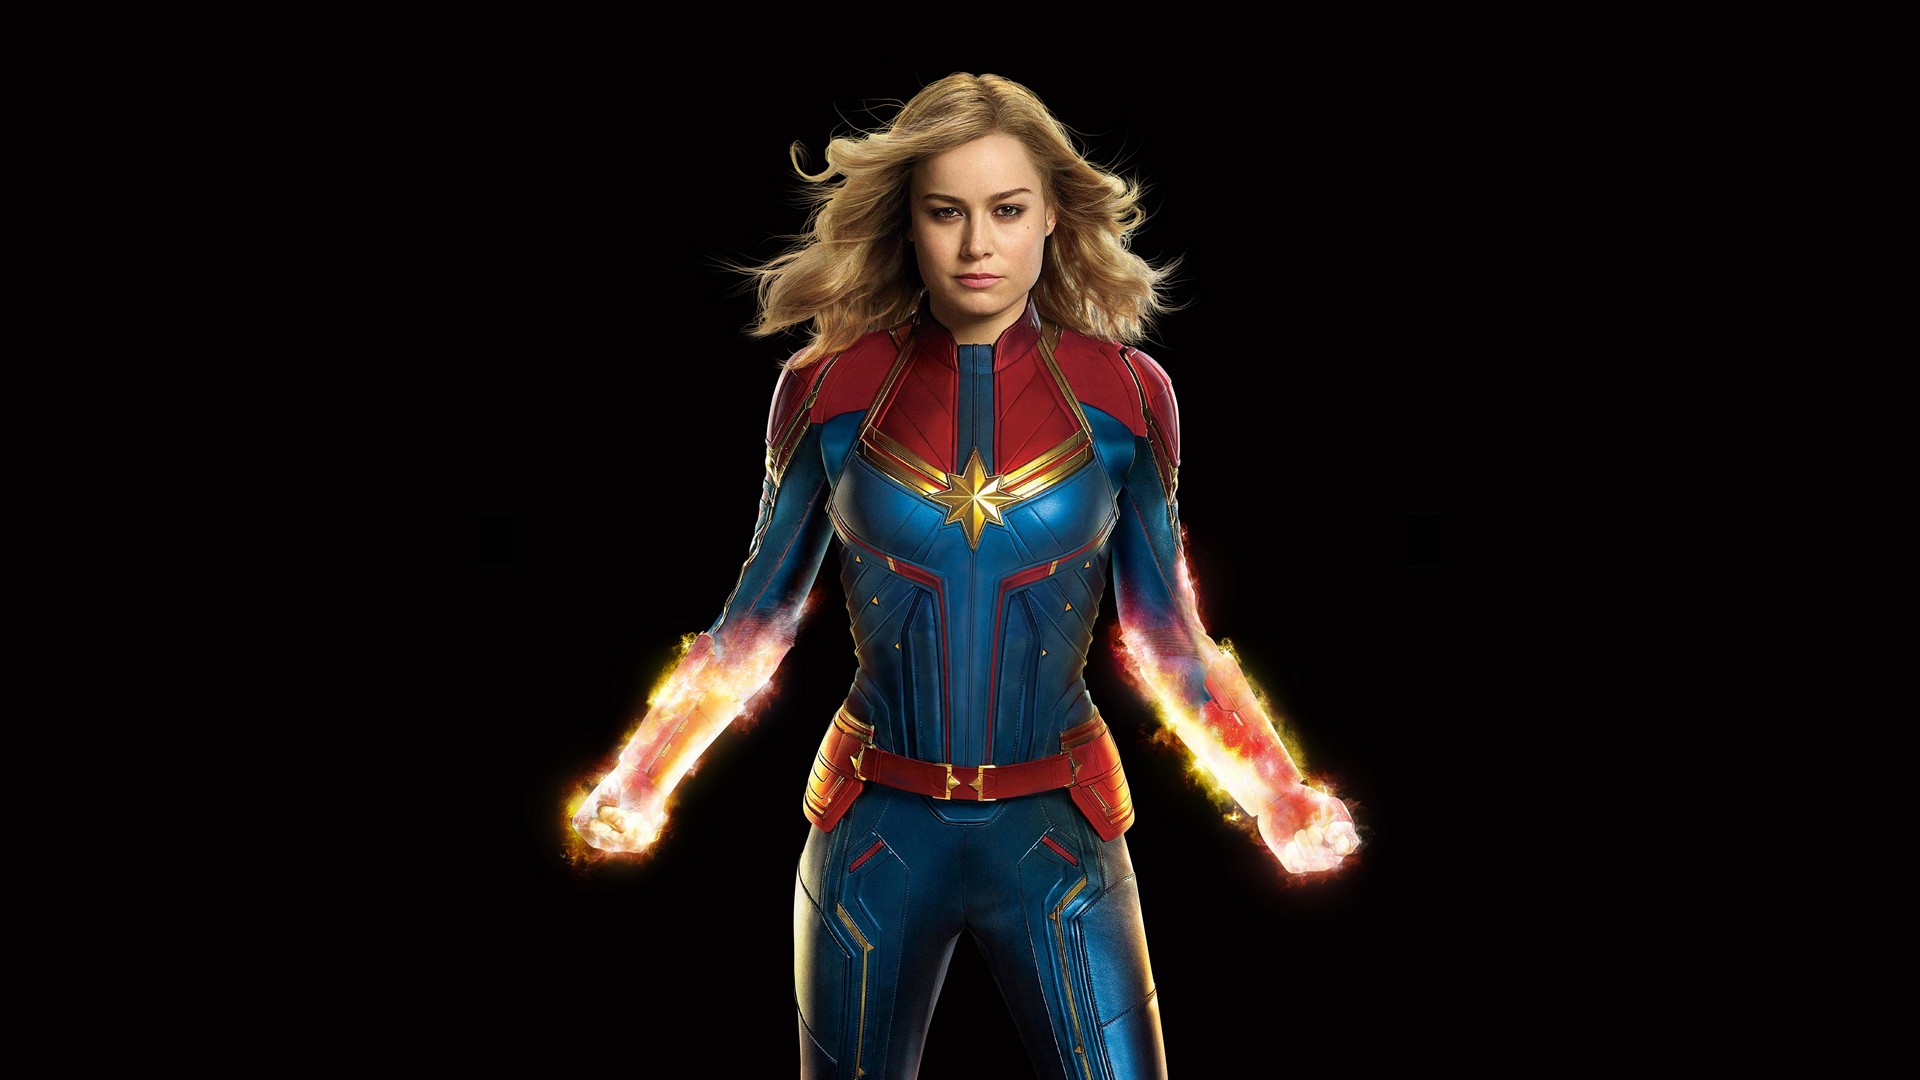 Wallpaper HD Captain Marvel with high-resolution 1920x1080 pixel. You can use this wallpaper for your Desktop Computer Backgrounds, Mac Wallpapers, Android Lock screen or iPhone Screensavers and another smartphone device